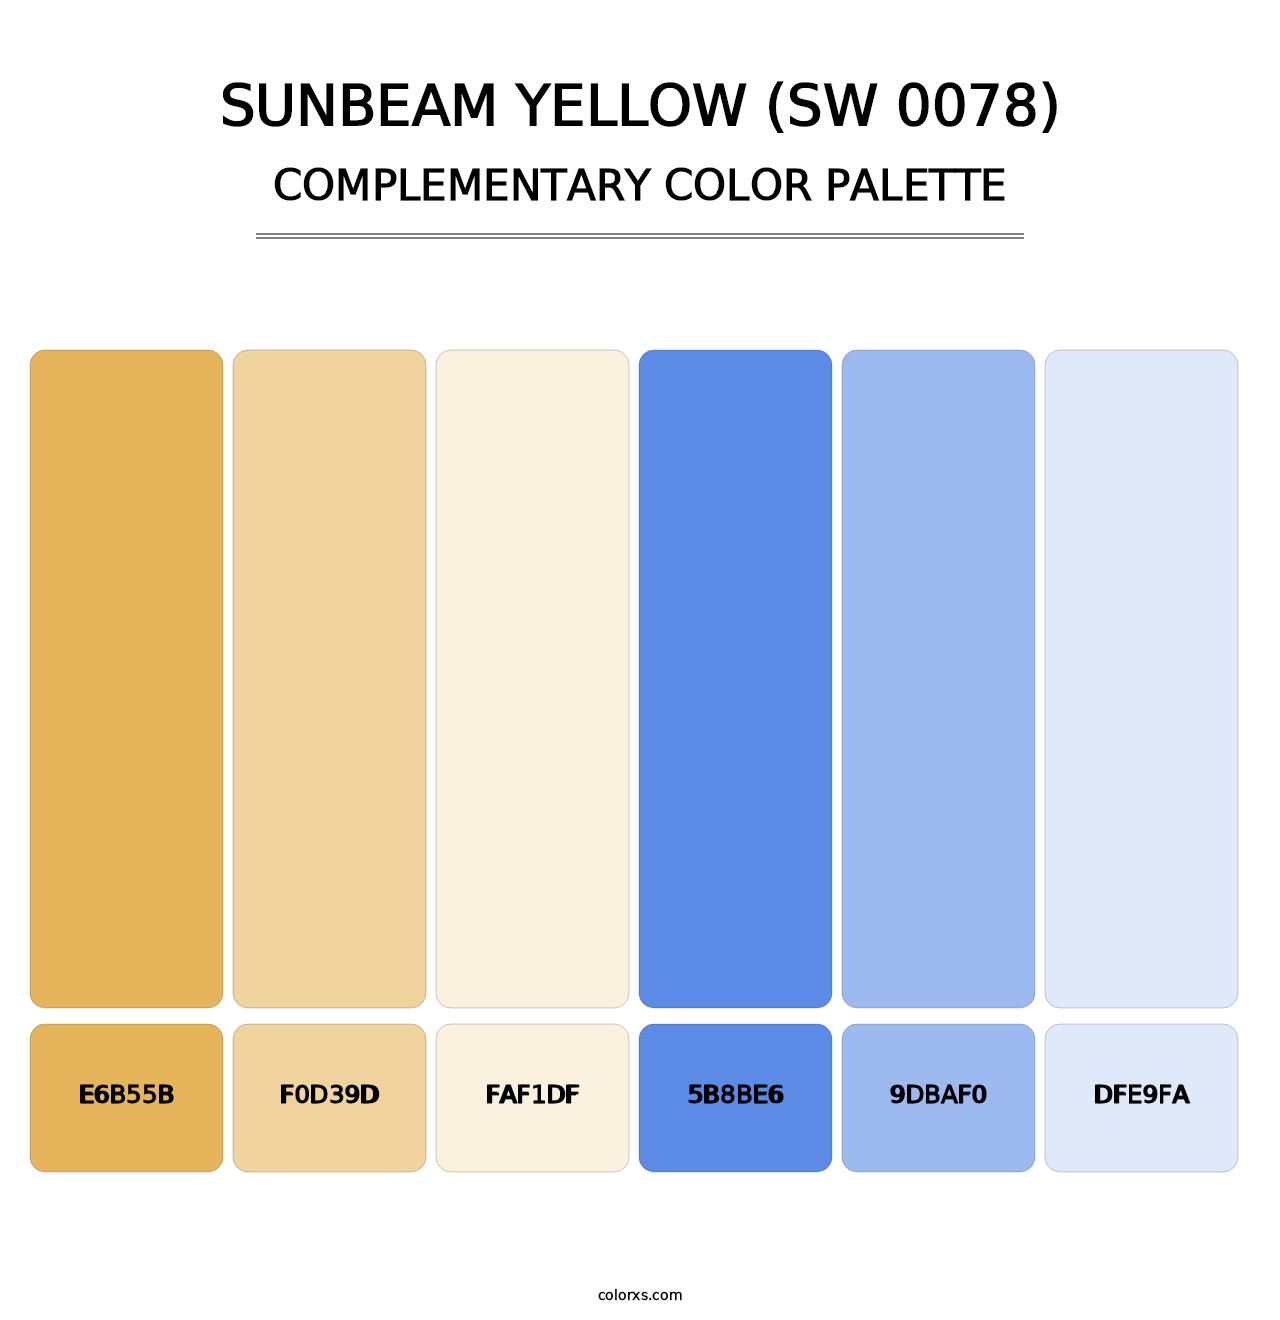 Sunbeam Yellow (SW 0078) - Complementary Color Palette